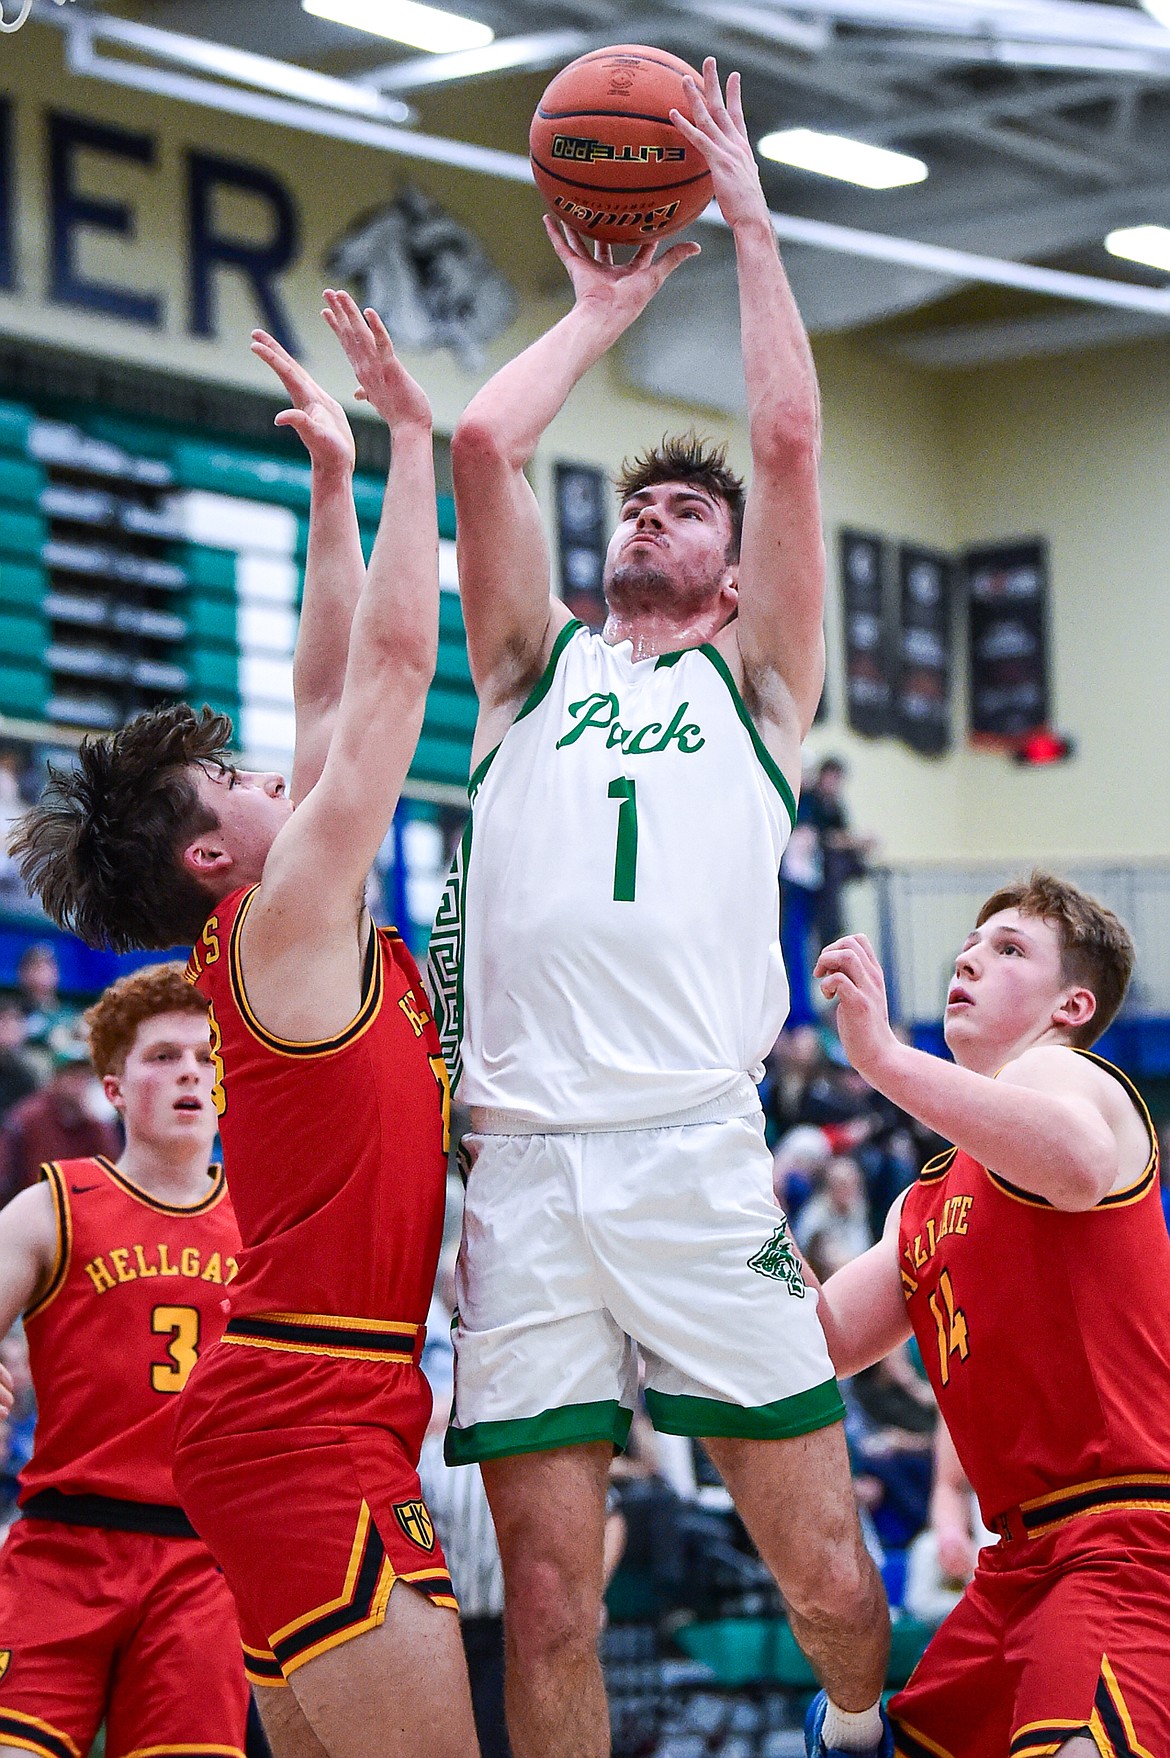 Glacier's Cohen Kastelitz (1) puts in a basket after grabbing an offensive rebound in the first half against Missoula Hellgate at Glacier High School on Tuesday, Feb. 20. (Casey Kreider/Daily Inter Lake)